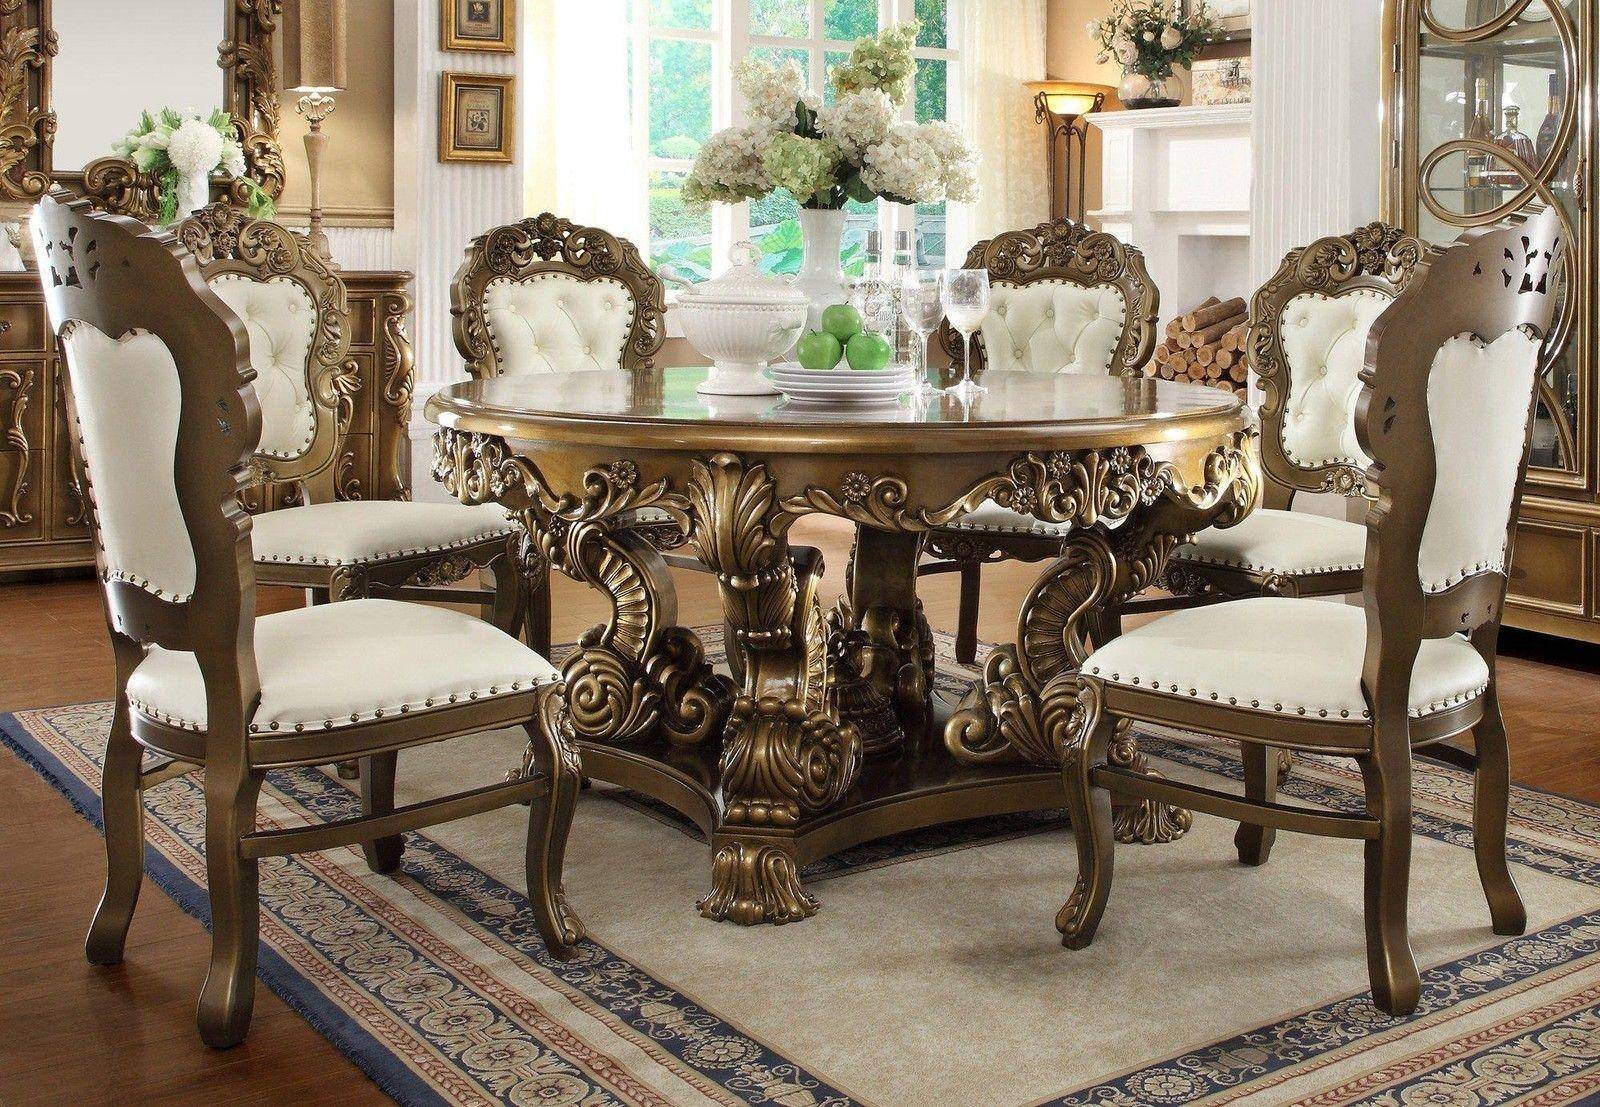 Buy Homey Design HD-8008 Dining Table Set 7 Pcs in Ivory, Golden Brown ...